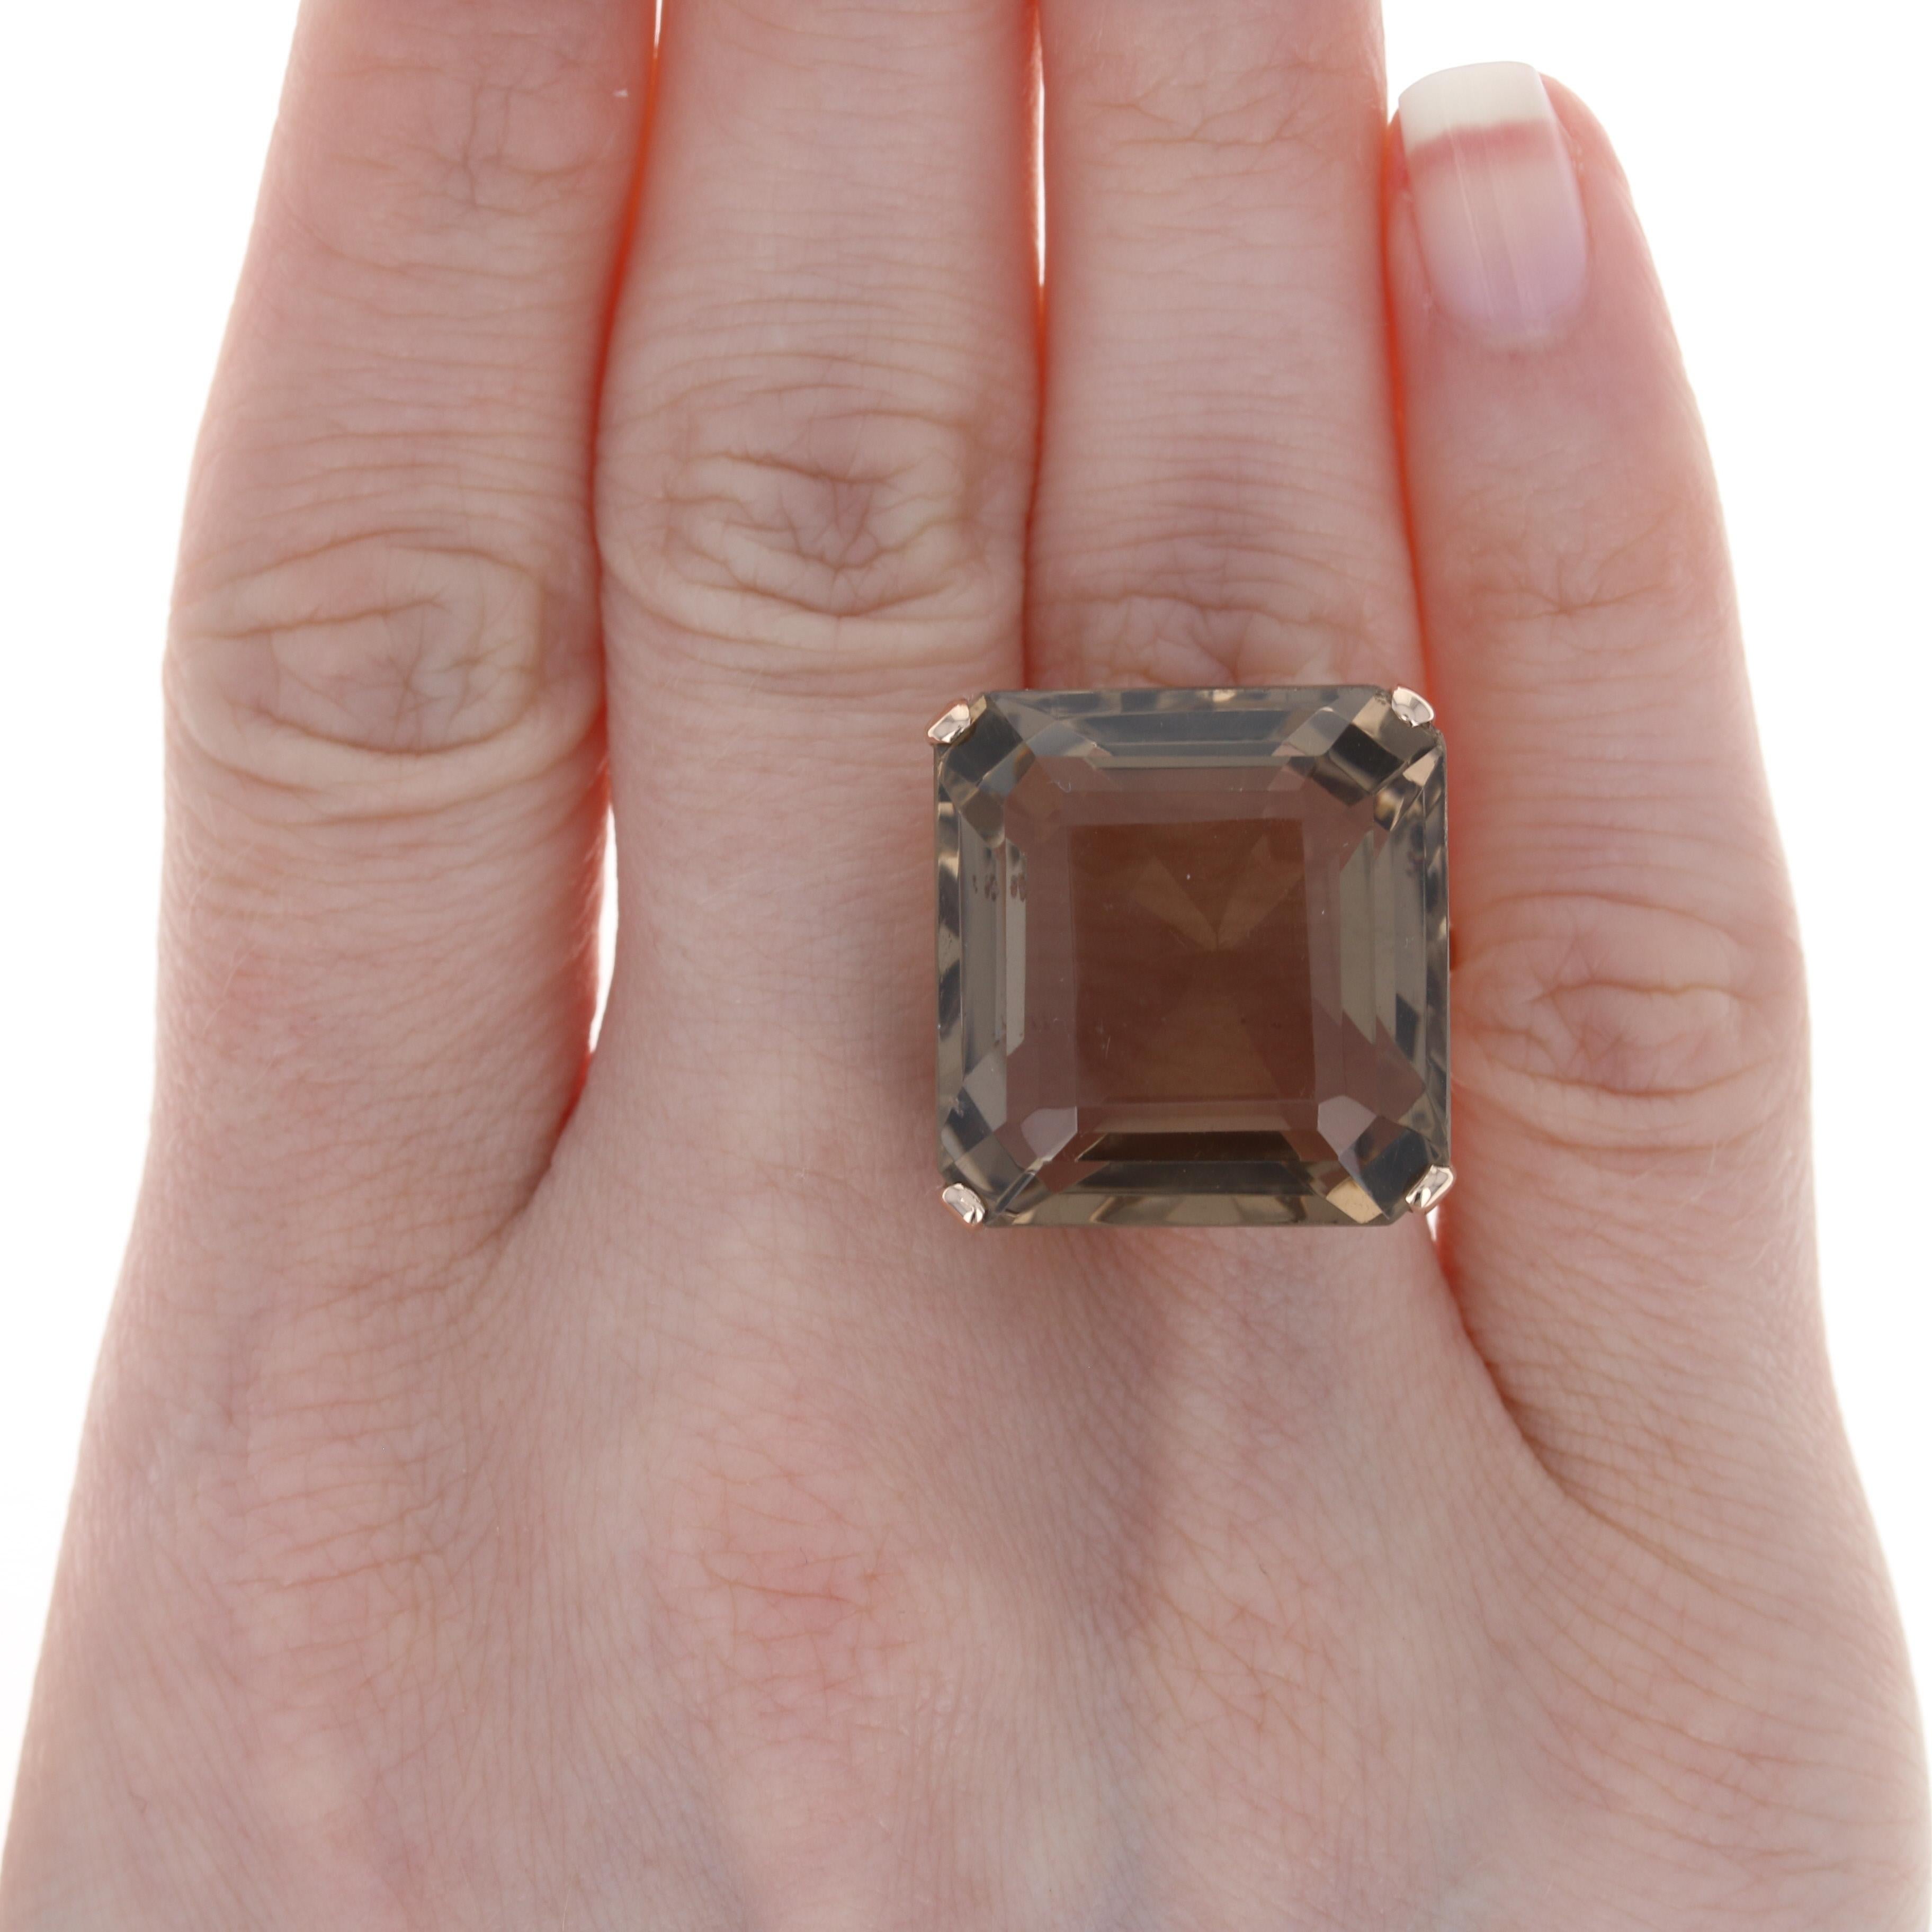 Size: 6 1/4
Sizing Fee: Can be sized down 1 size or up 2 sizes for $30

Era: Vintage

Metal Content: 14k Yellow Gold

Stone Information: 
Genuine Smoky Quartz
Carat: 35.20ct
Color: Brown
Size: 21.3mm x 20.3mm

Style: Cocktail Solitaire

Face Height